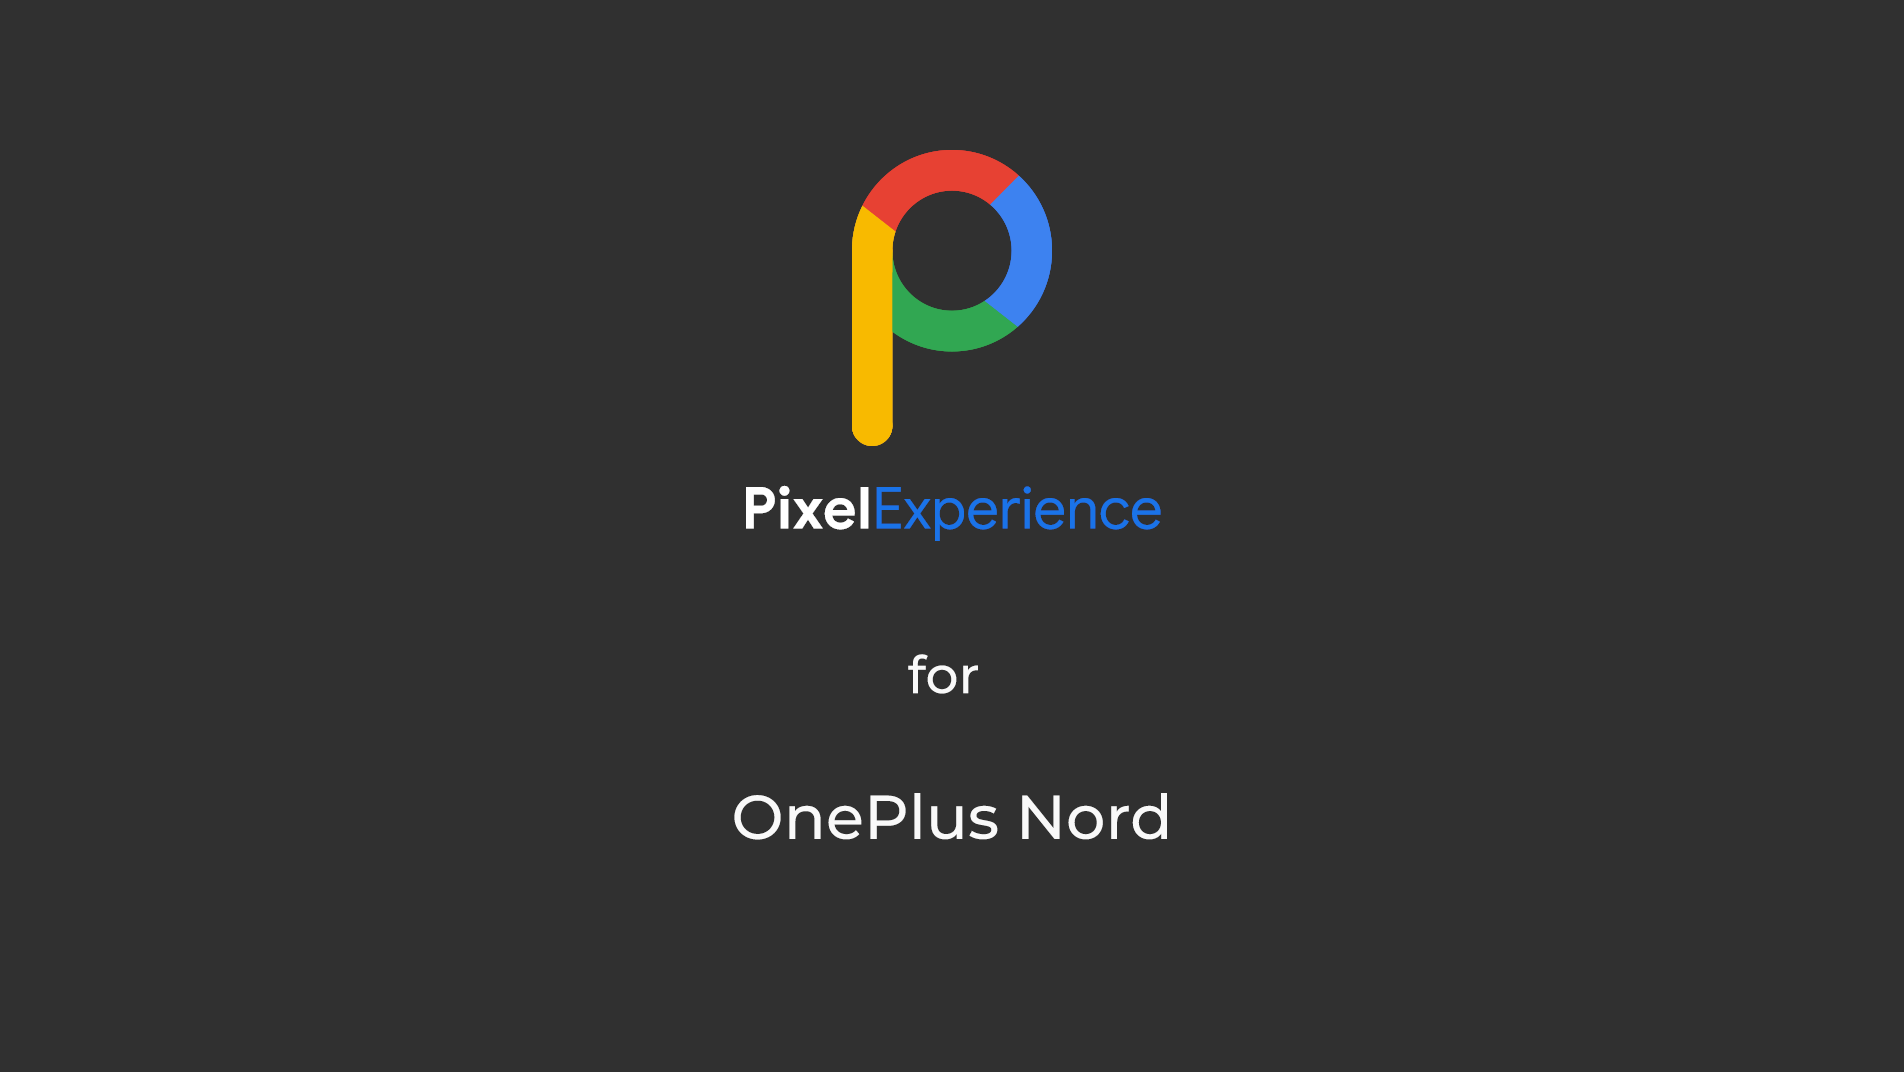 Pixel Experience for OnePlus Nord